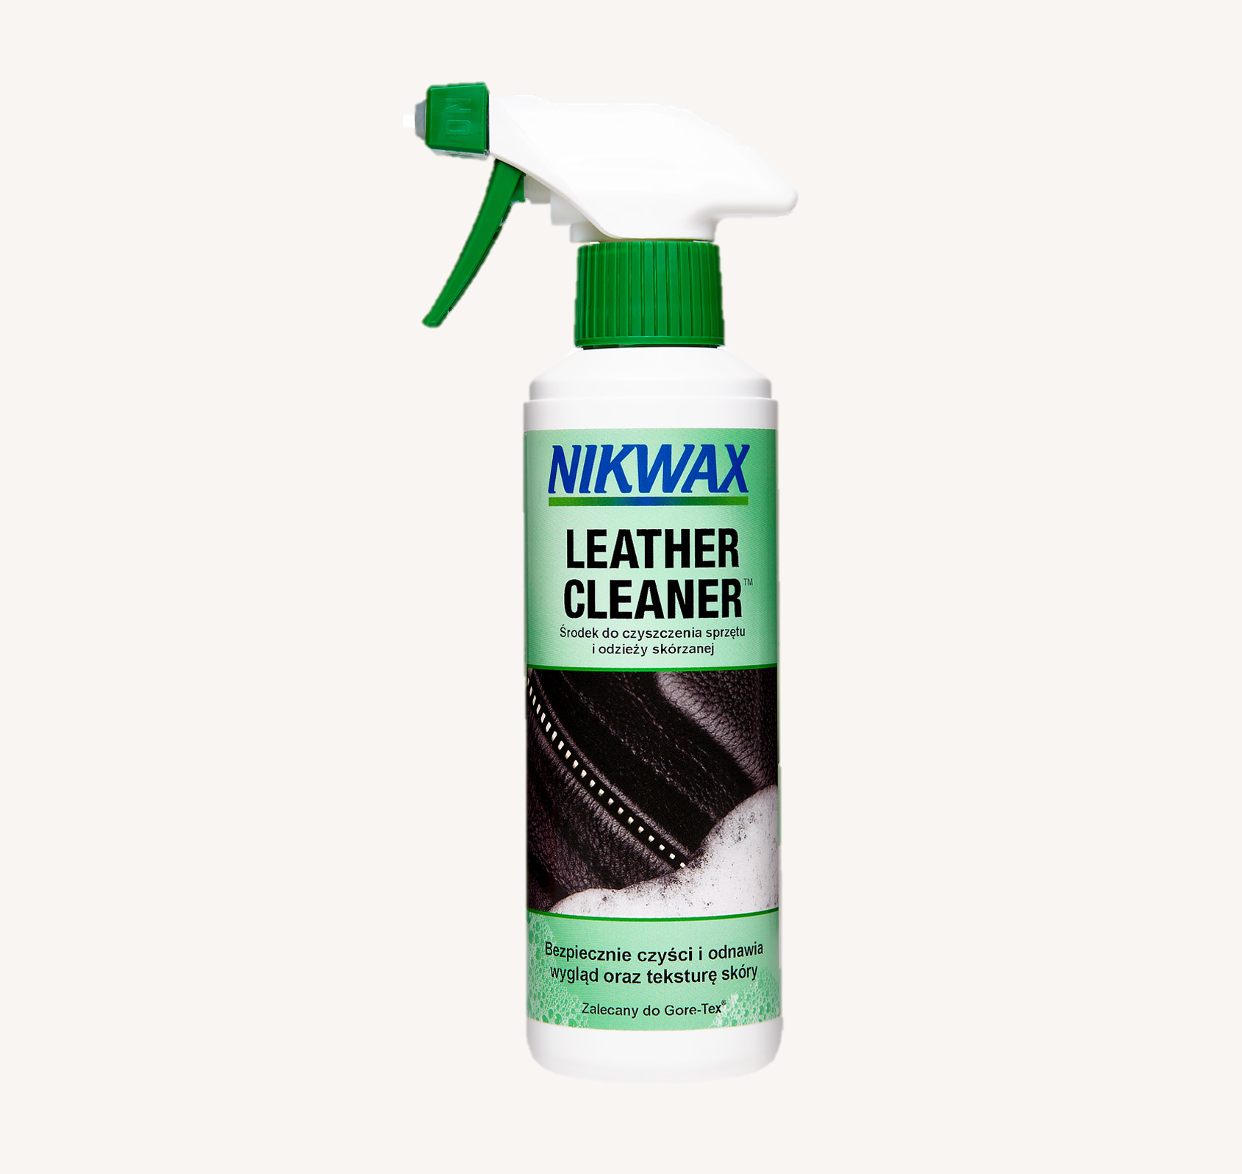 Nikwax - cleaner for leather equipment and clothing 300ml